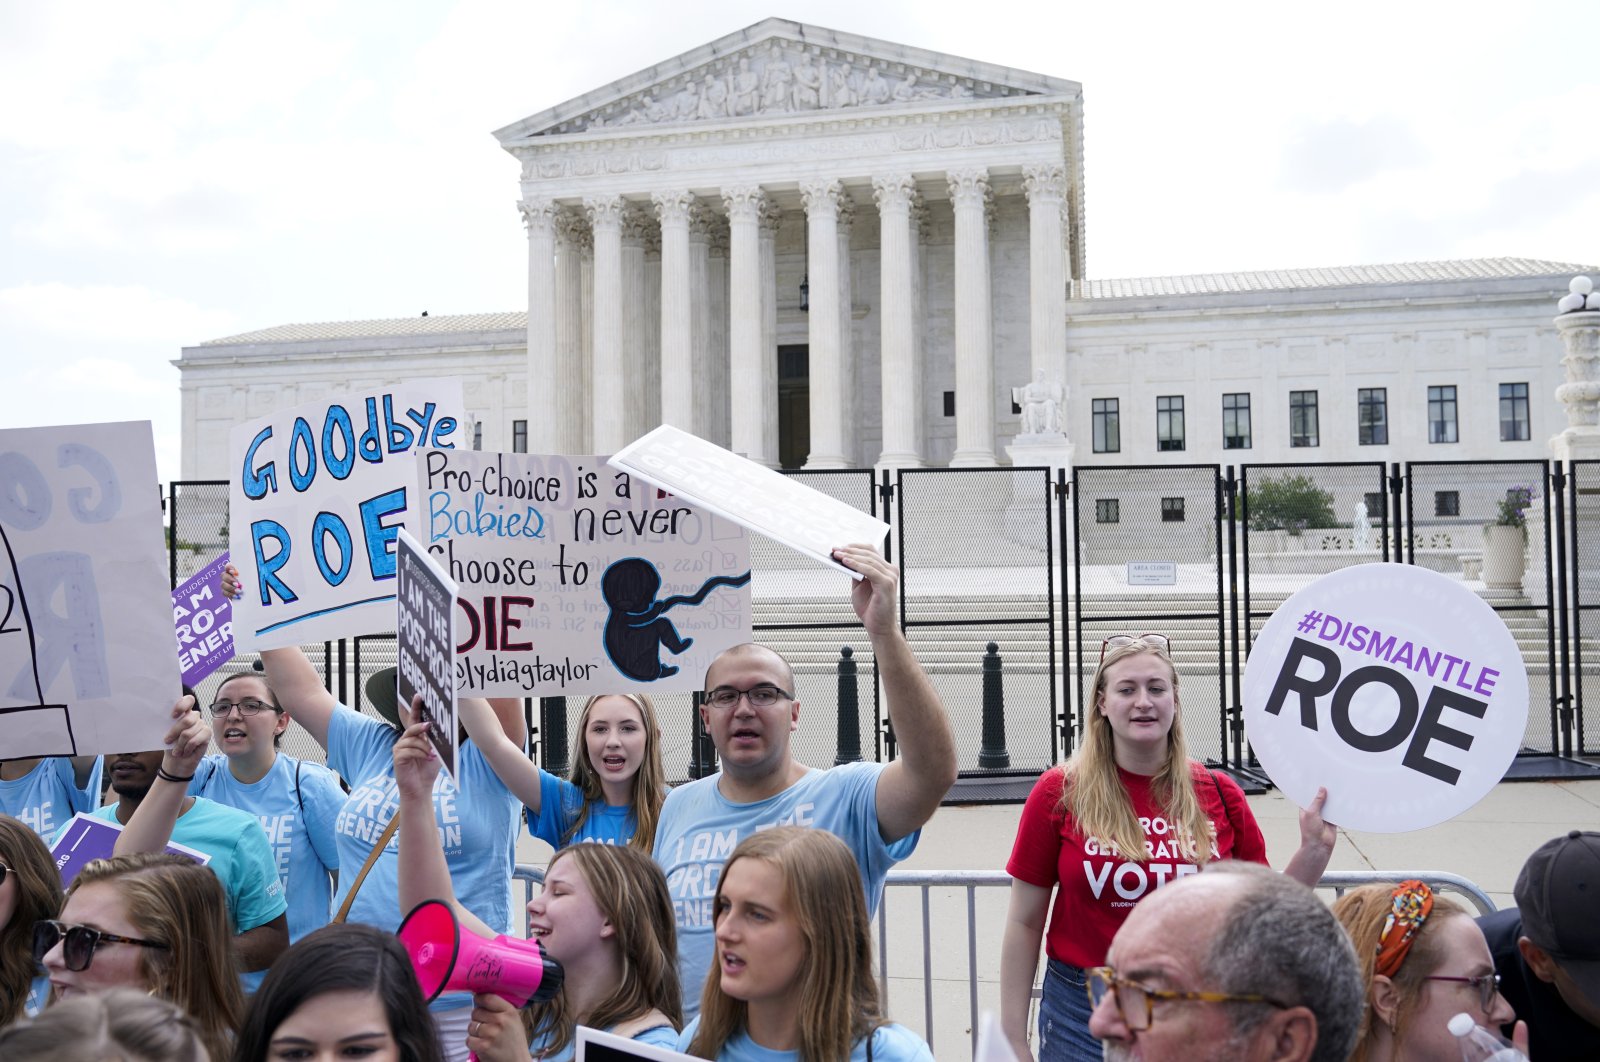 Demonstrators protest about abortion outside the Supreme Court in Washington, U.S., June 24, 2022. The Supreme Court has ended constitutional protections for abortion that had been in place for nearly 50 years in a decision by its conservative majority to overturn Roe v. Wade. Friday&#039;s outcome is expected to lead to abortion bans in roughly half the states. (AP Photo)